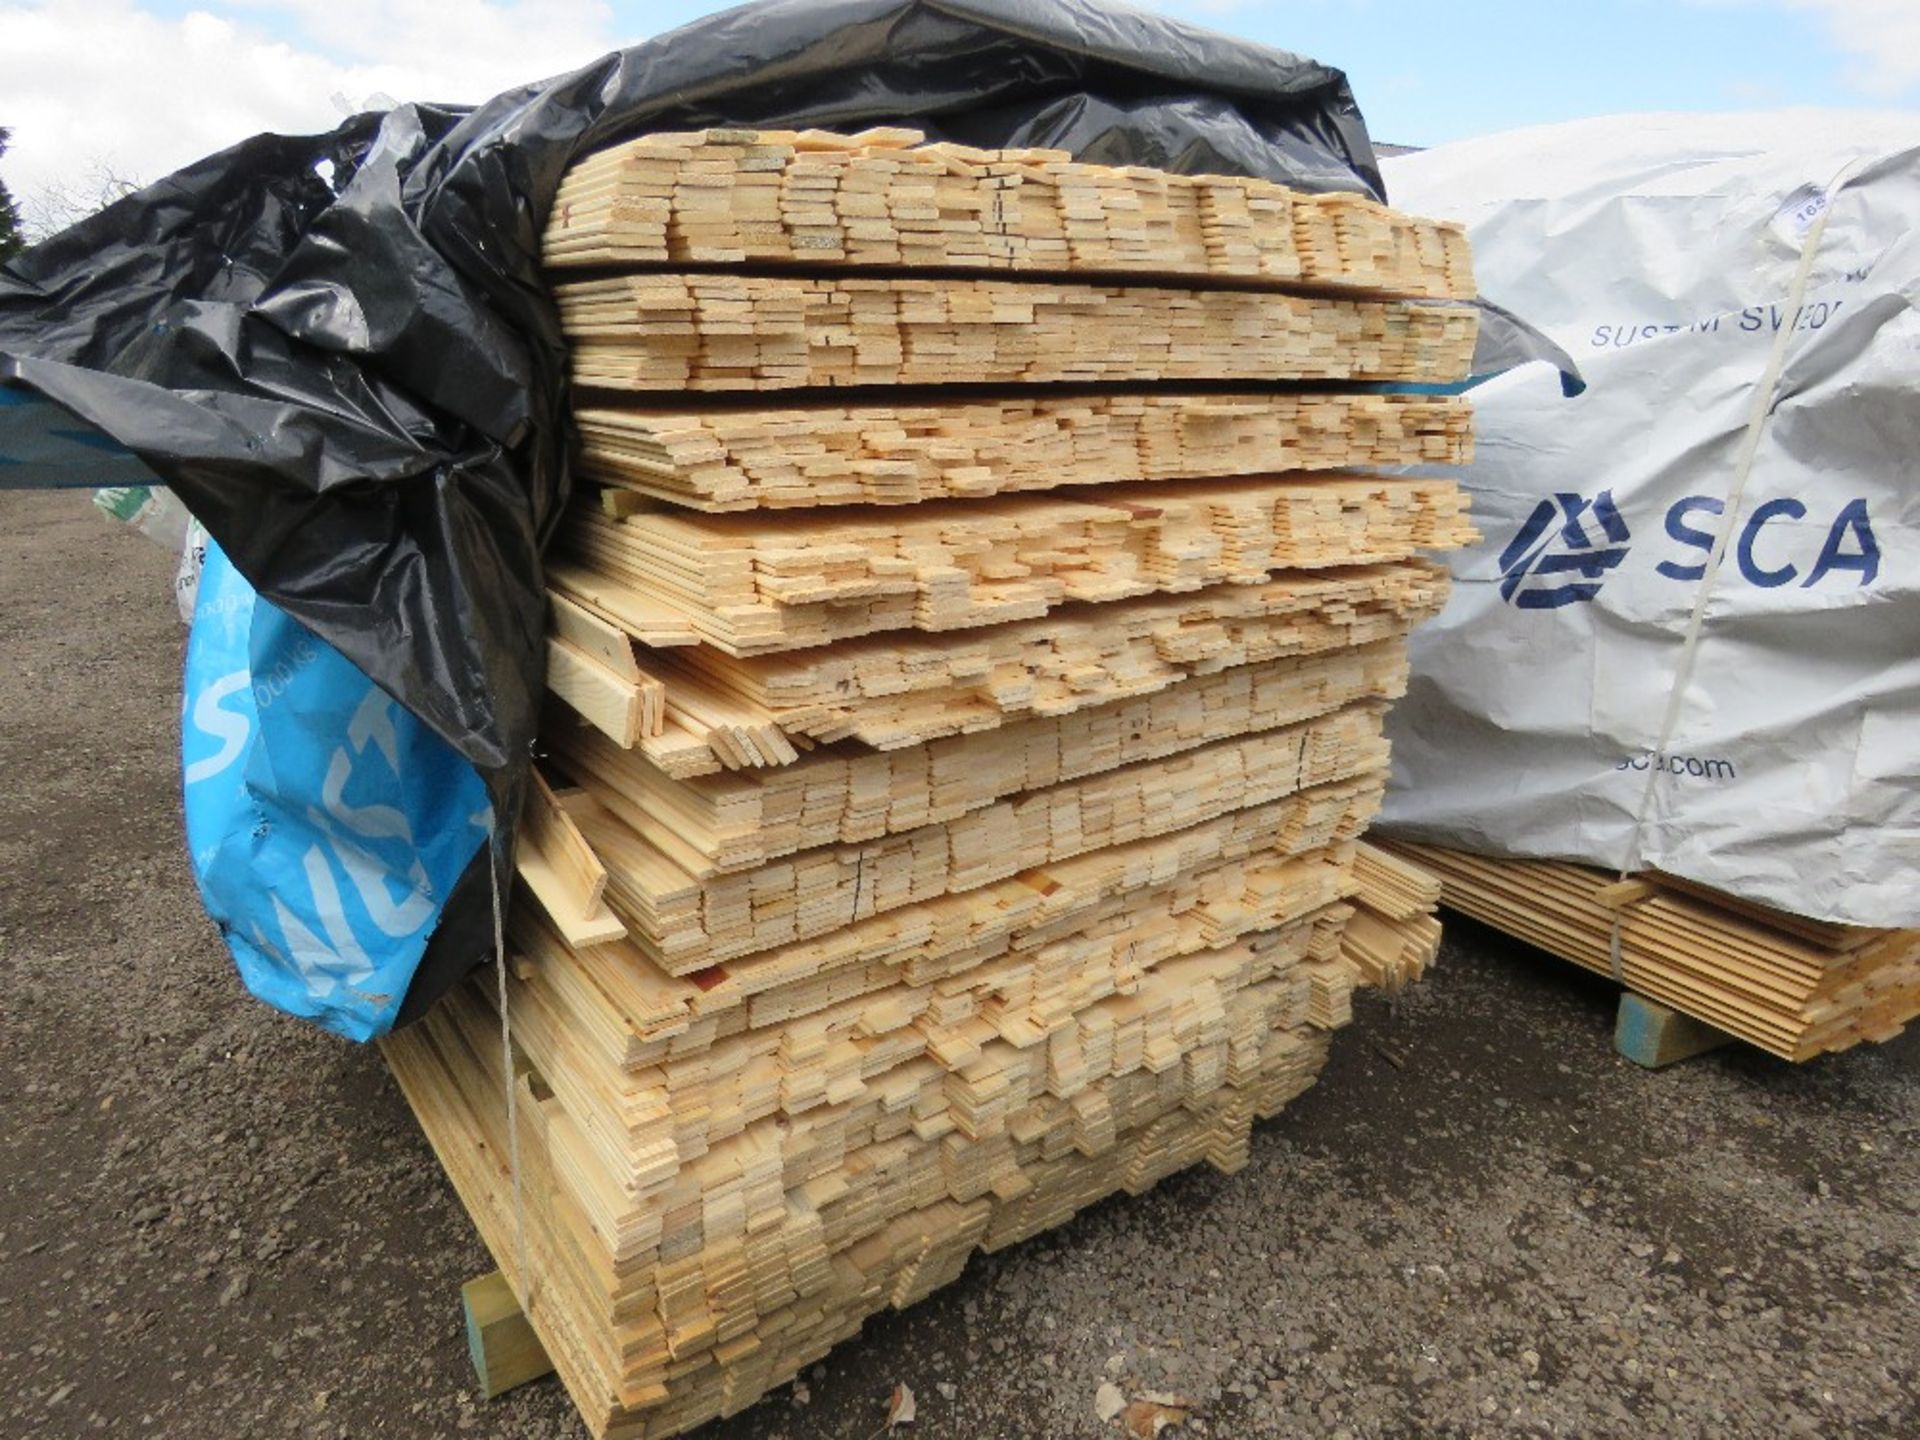 EXTRA LARGE PACK OF UNTREATED WOVEN FENCING TIMBER SLATS 40MM WIDTH X 1.75M LENGTH APPROX.